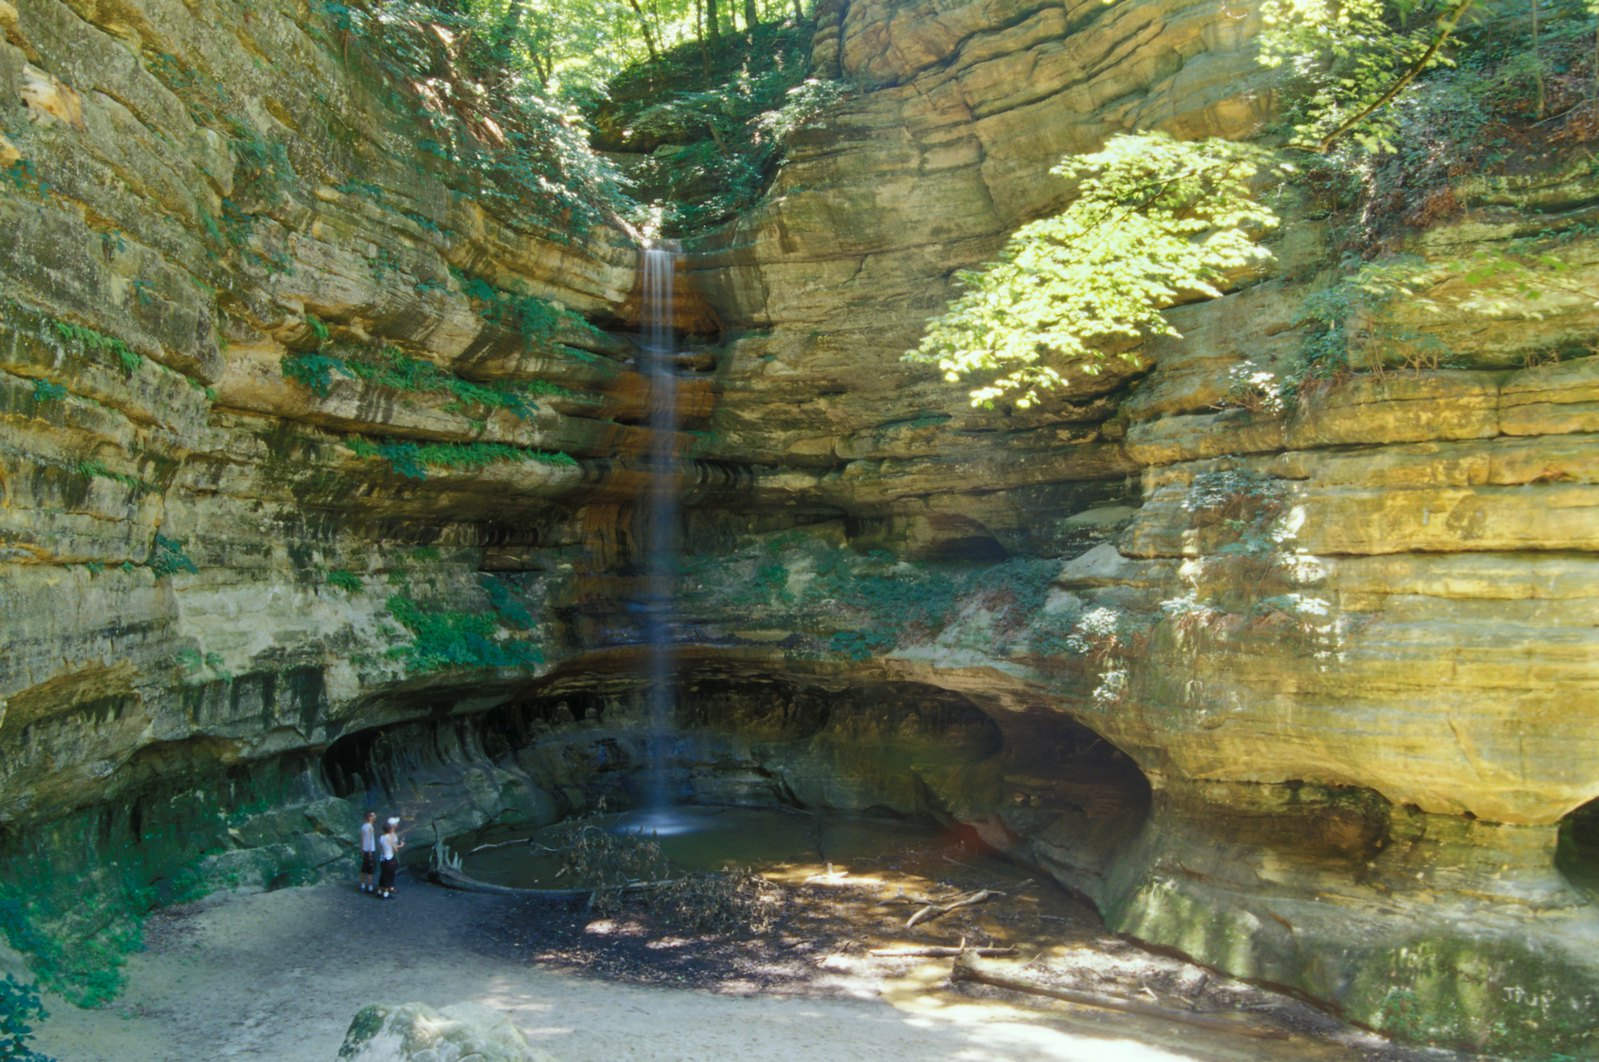 The Waterfall at St. Louis Canyon